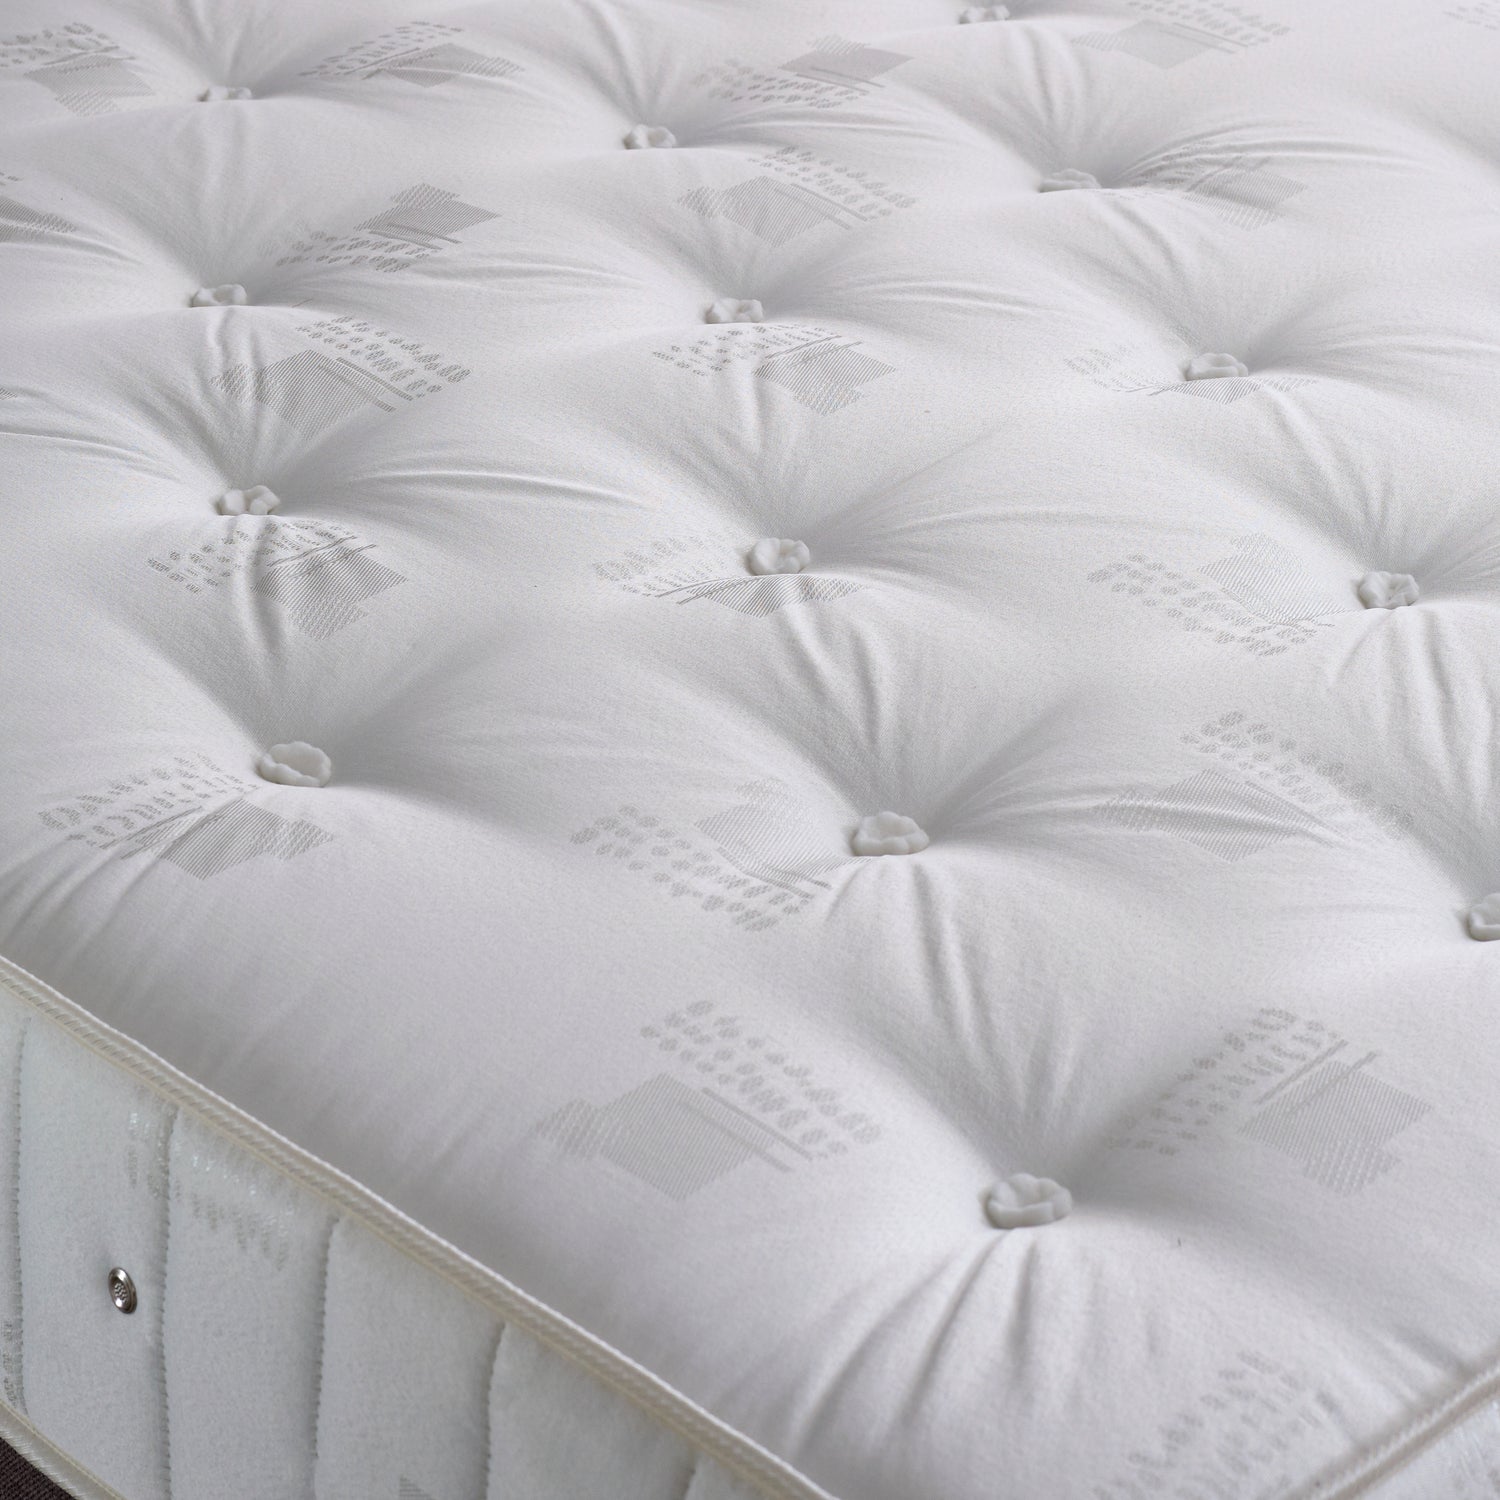 Bedmaster Promo Mattress Tufts And Cover Close Up-Better Bed Company 